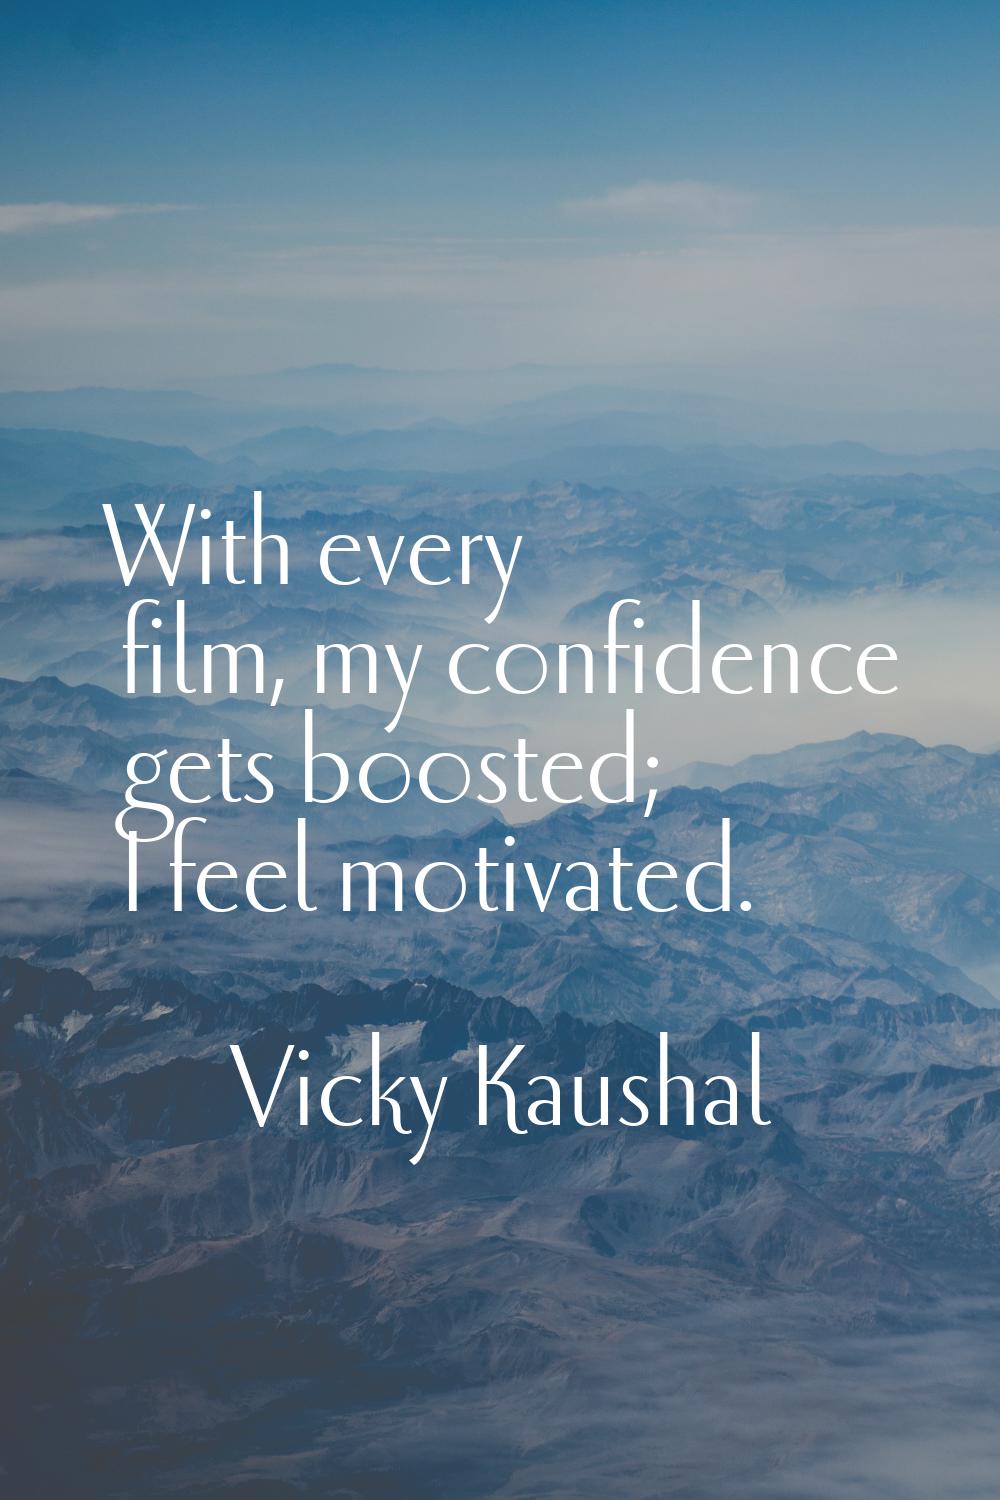 With every film, my confidence gets boosted; I feel motivated.